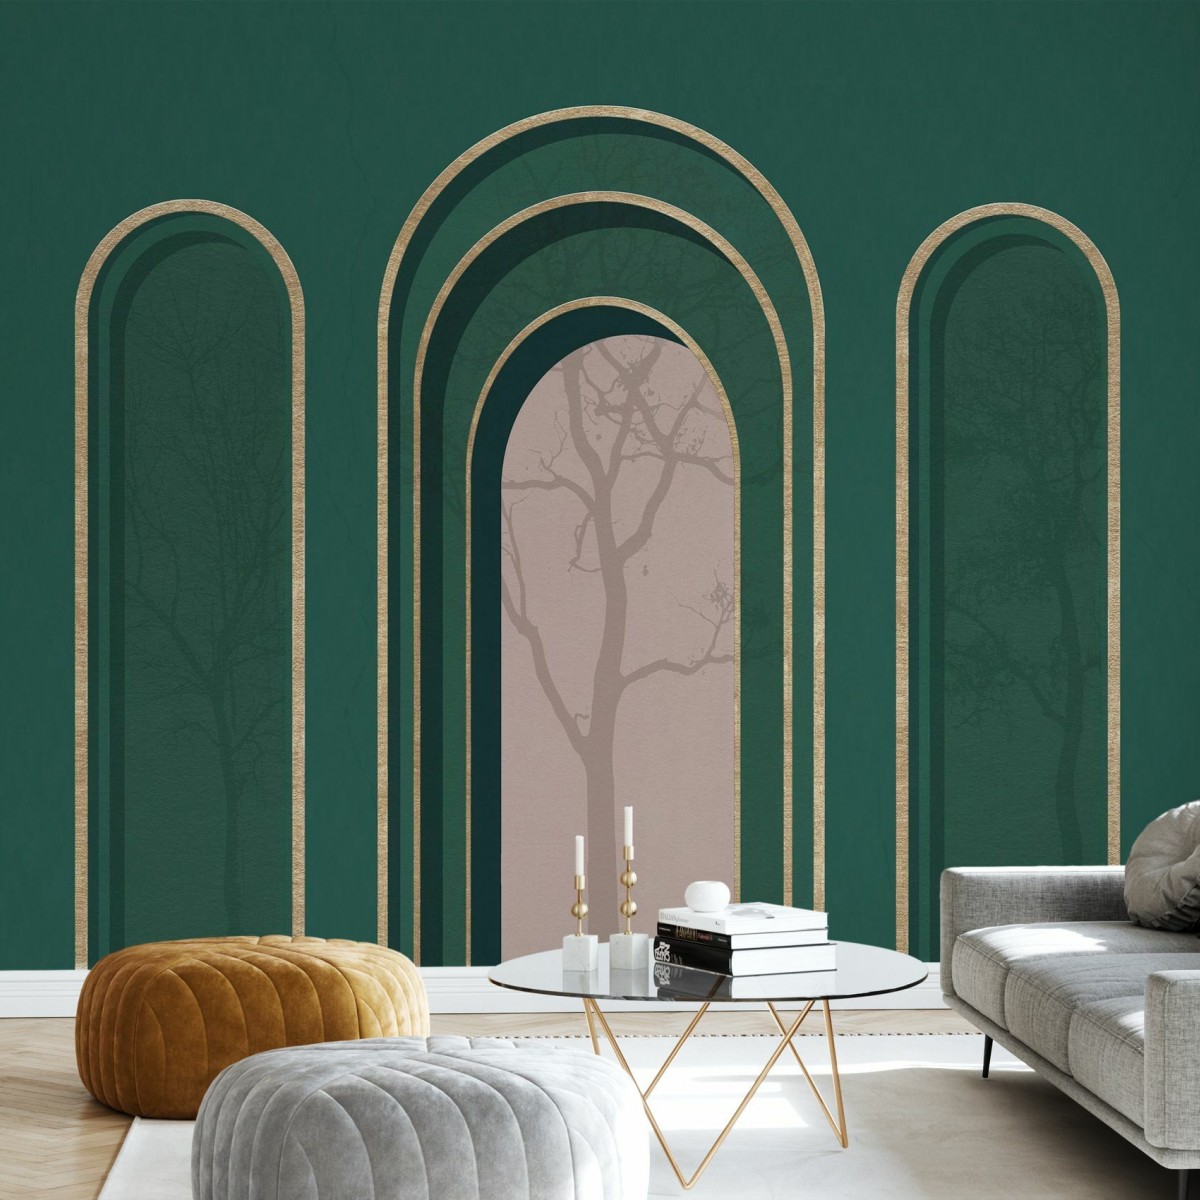 Fototapet Arch Adornment with Trees, Green, Personalizat, Photowall, Fototapet living 